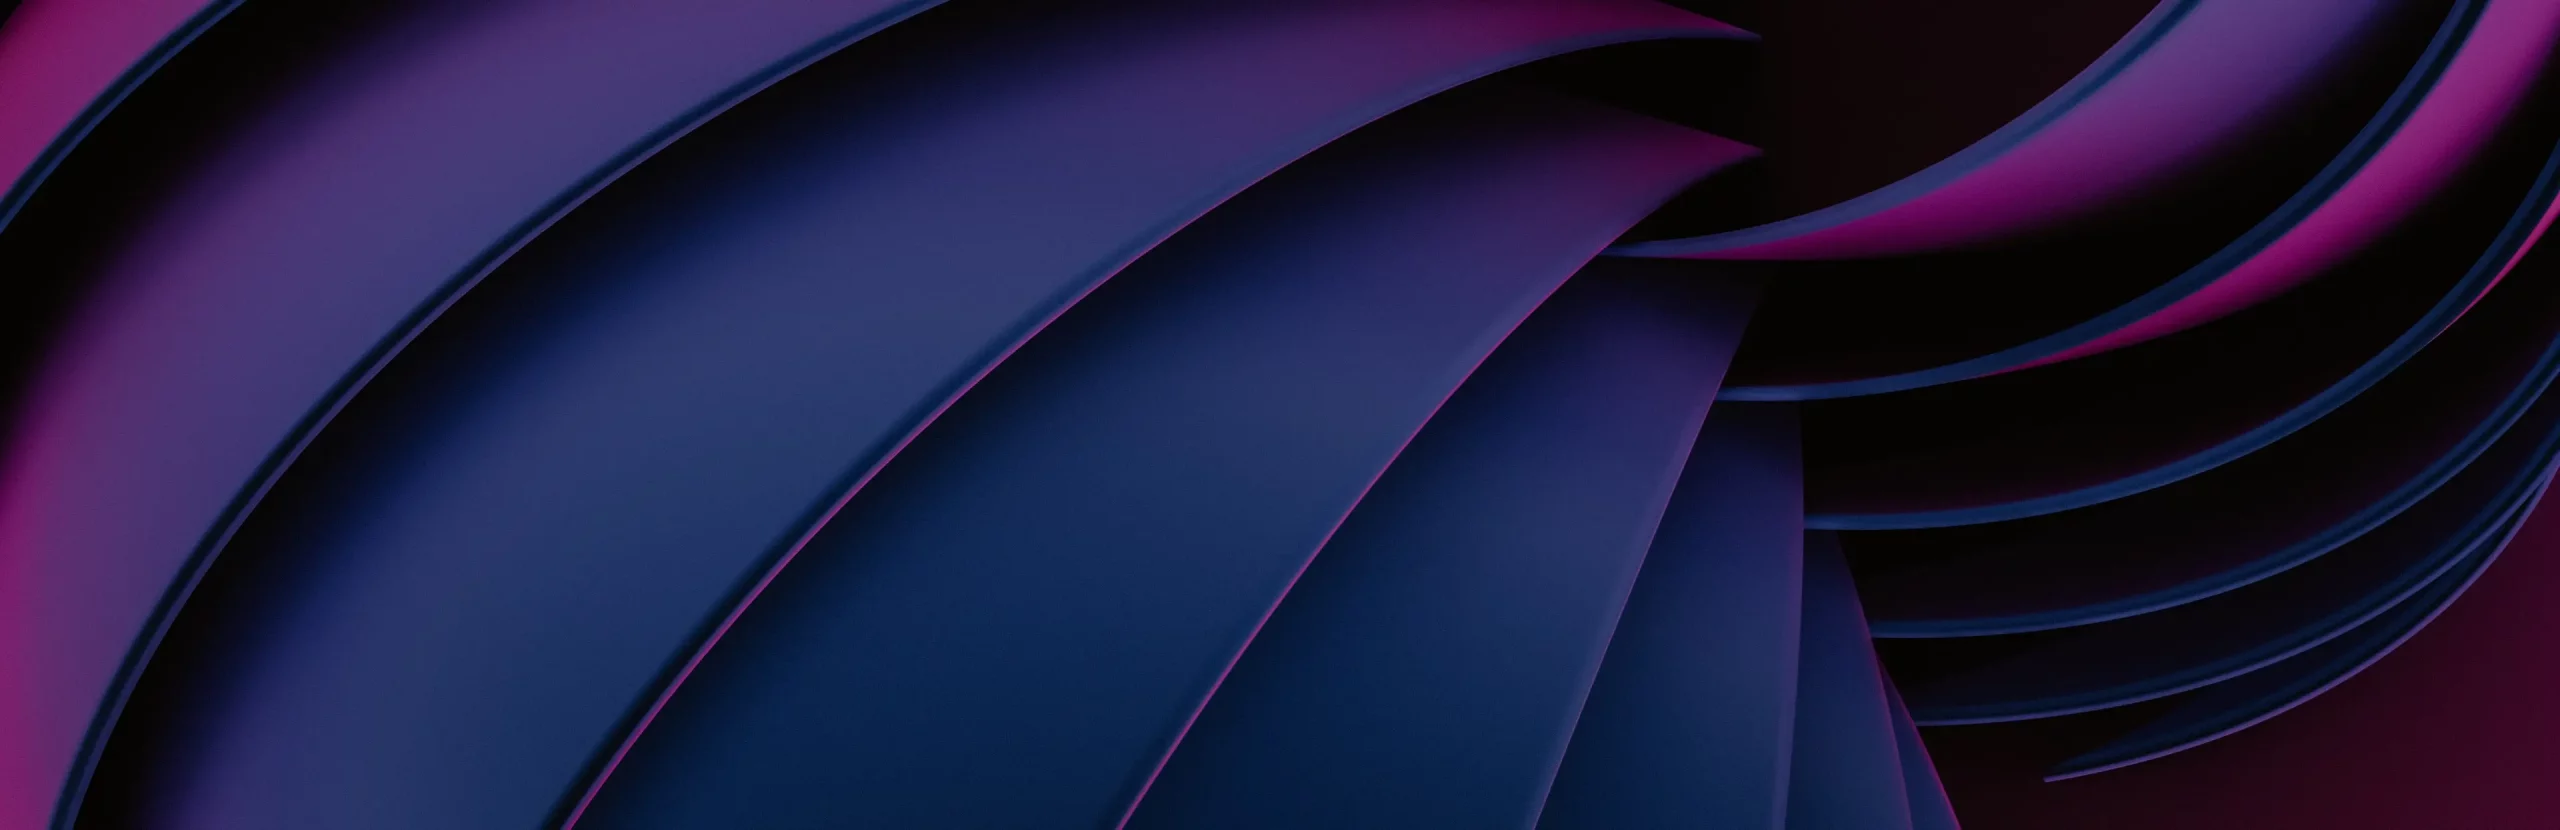 Pink and purple abstract background 2 HIGH RES cropped scaled